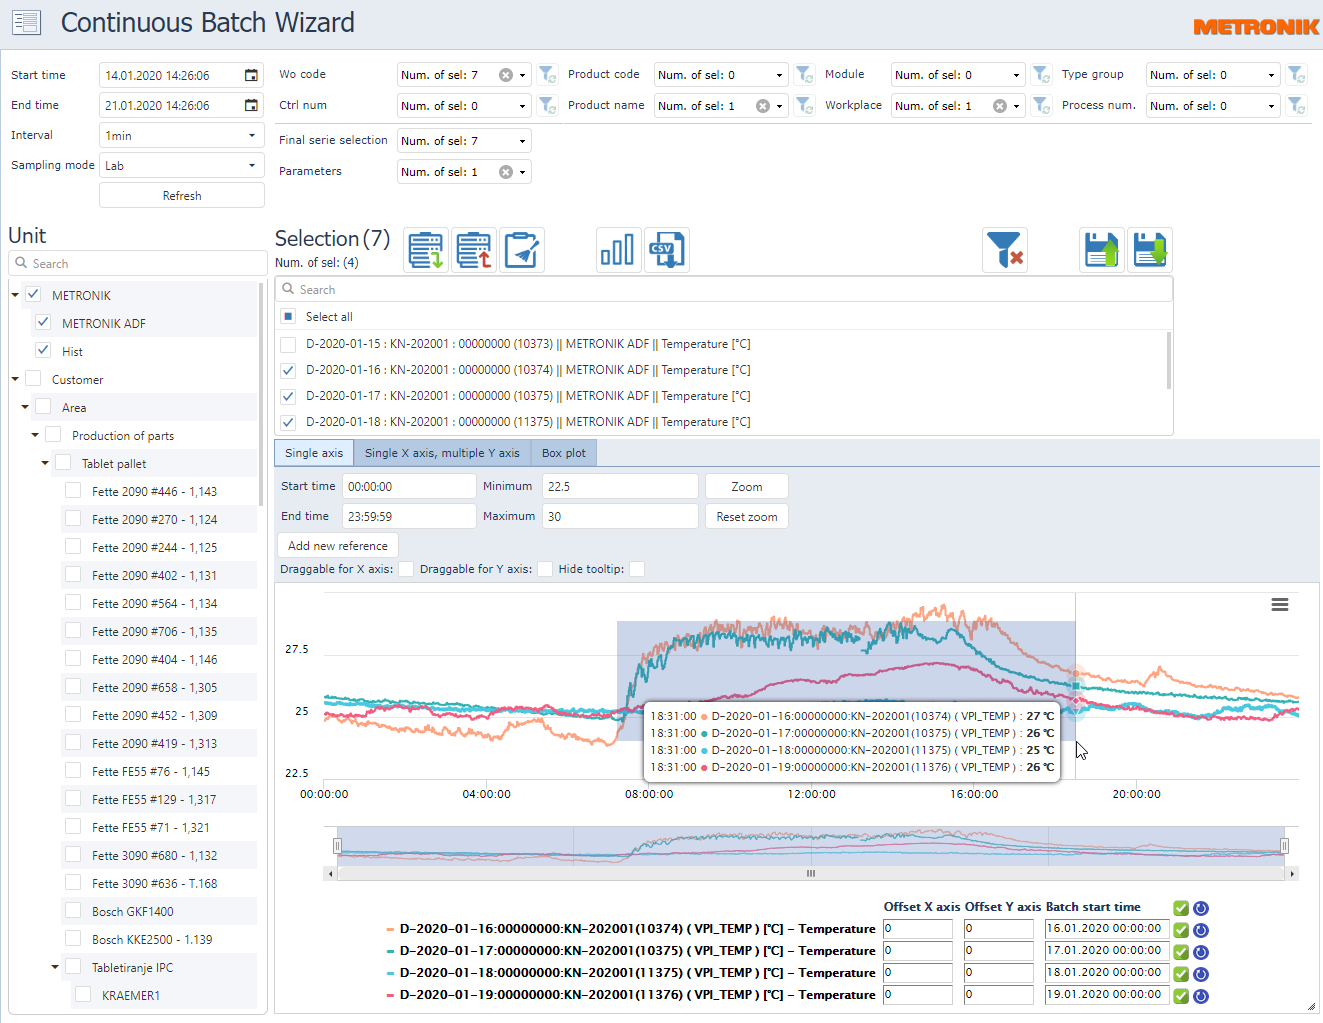 user-interface-of-mepis-pdm-software-solution-for-process-data-management-batch-analysis-advanced-reporting-for-production